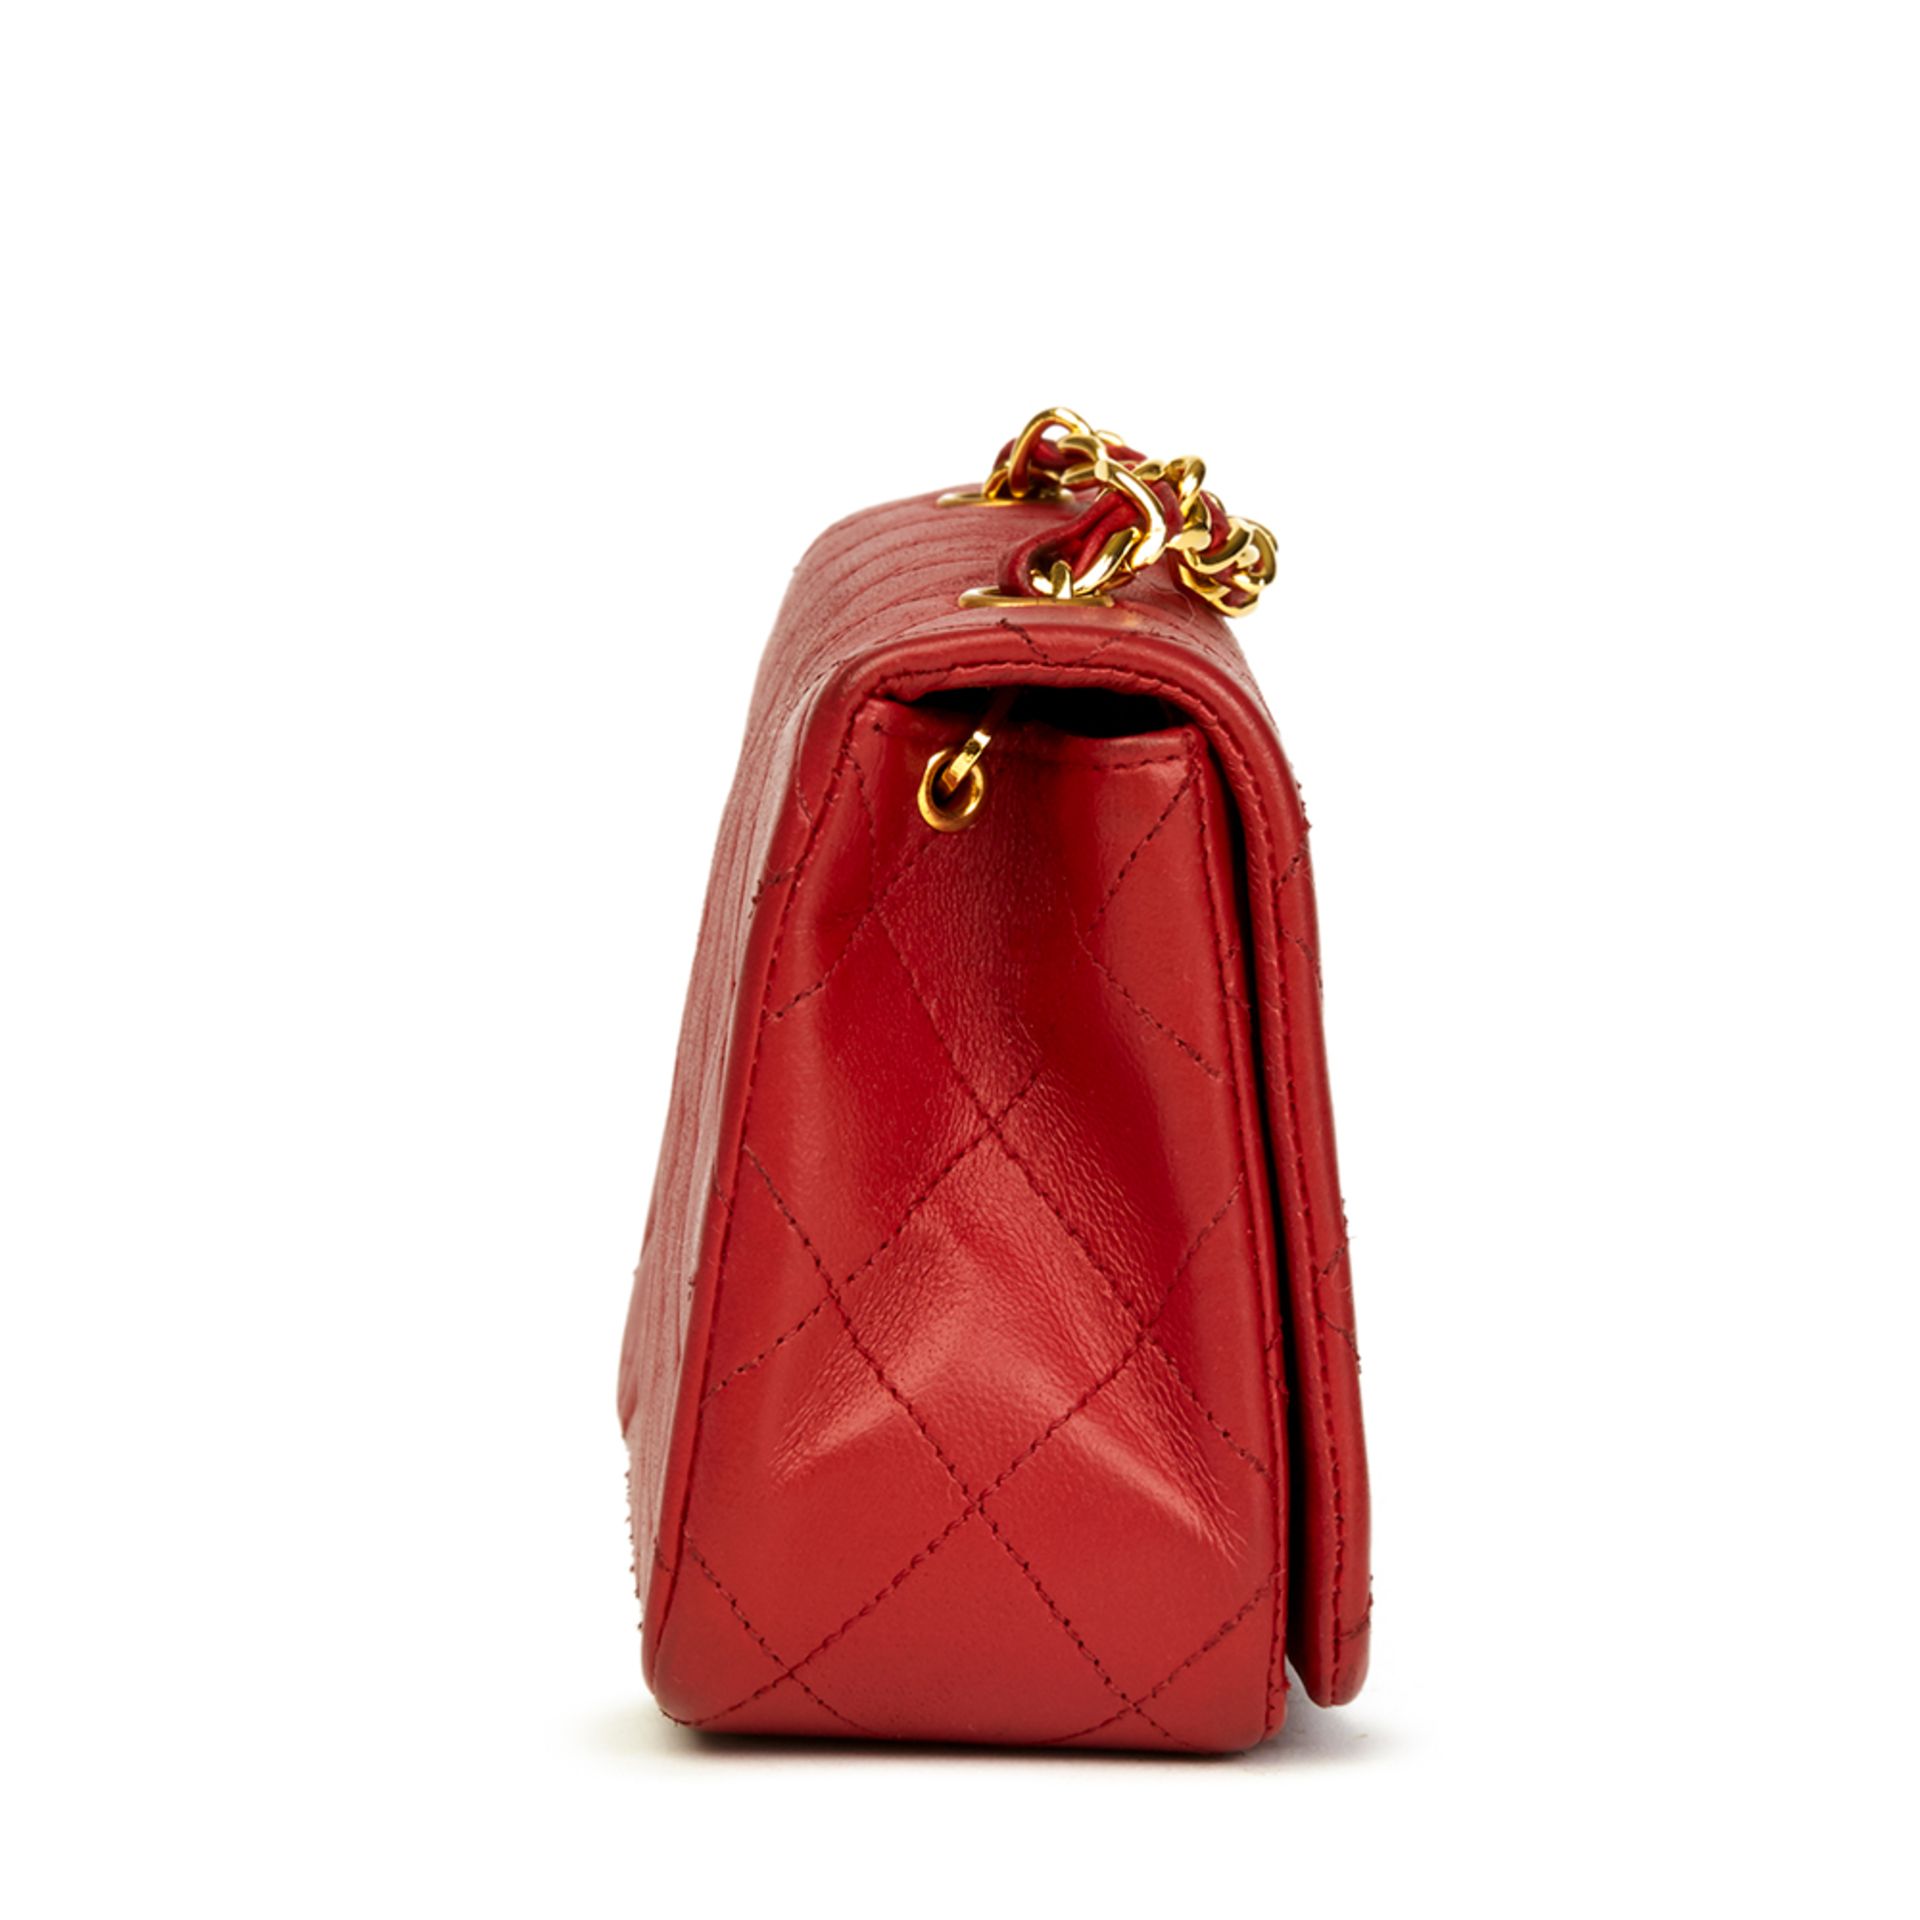 Chanel Red Quilted Lambskin Vintage Mini Flap Bag - Image 3 of 9